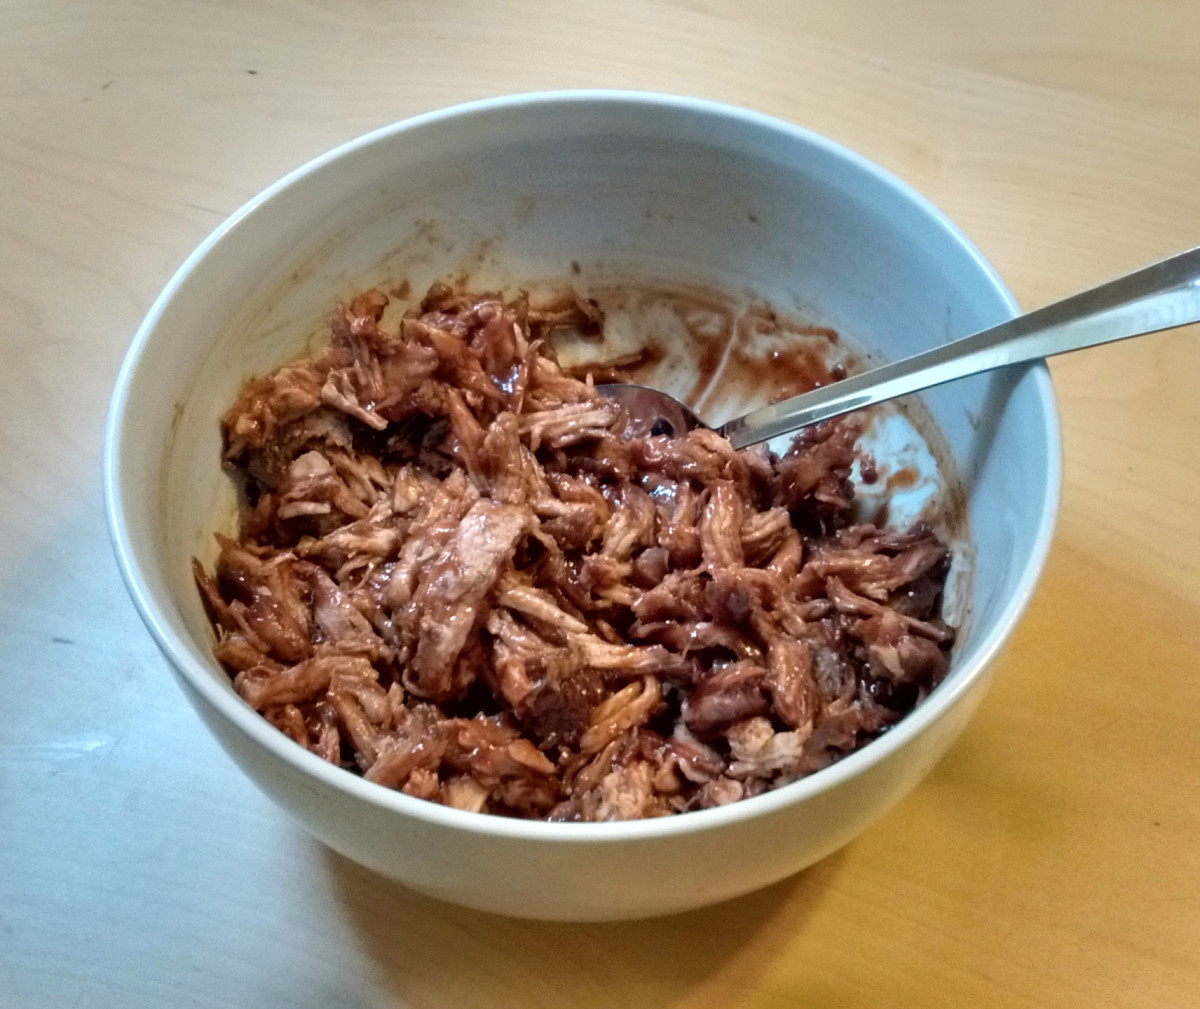 Shredded pork mixed with BBQ sauce